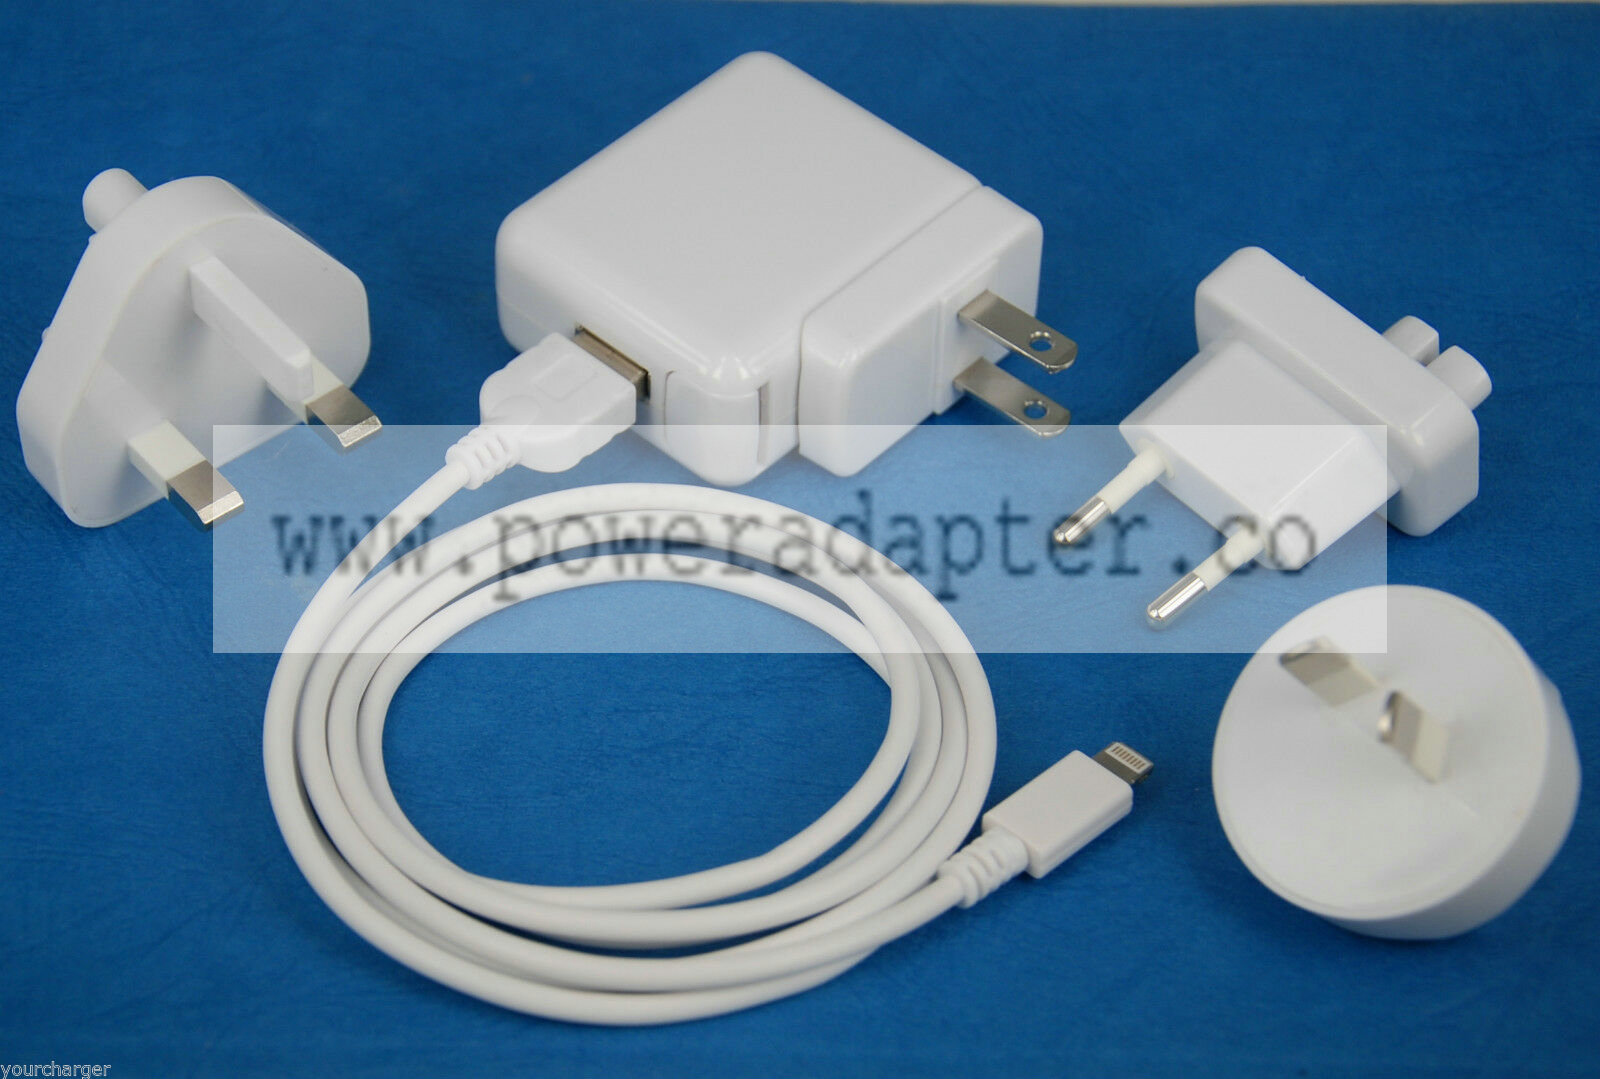 12W AC Power Adapter Wall Charger+6ft 2M USB cable WHITE for iPad Air 2 4 mini 3 Type: Travel Charger + USB Cable Col